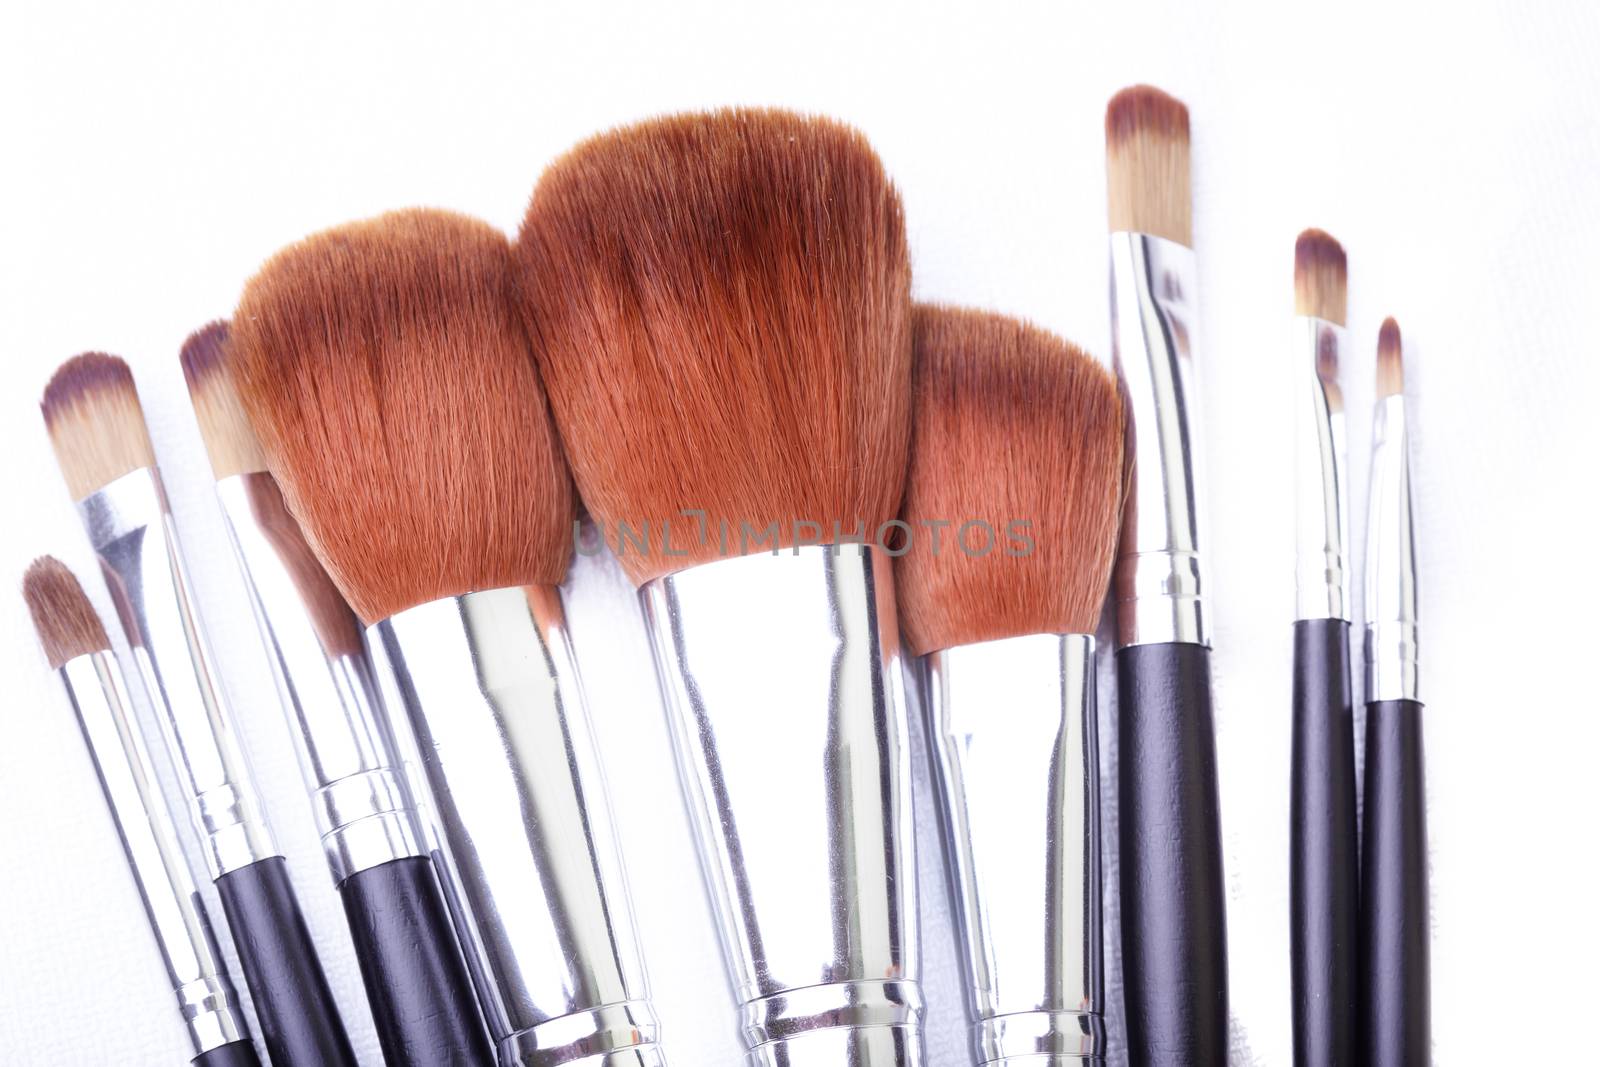 Set of makeup brush in leather cover. Close-up photo